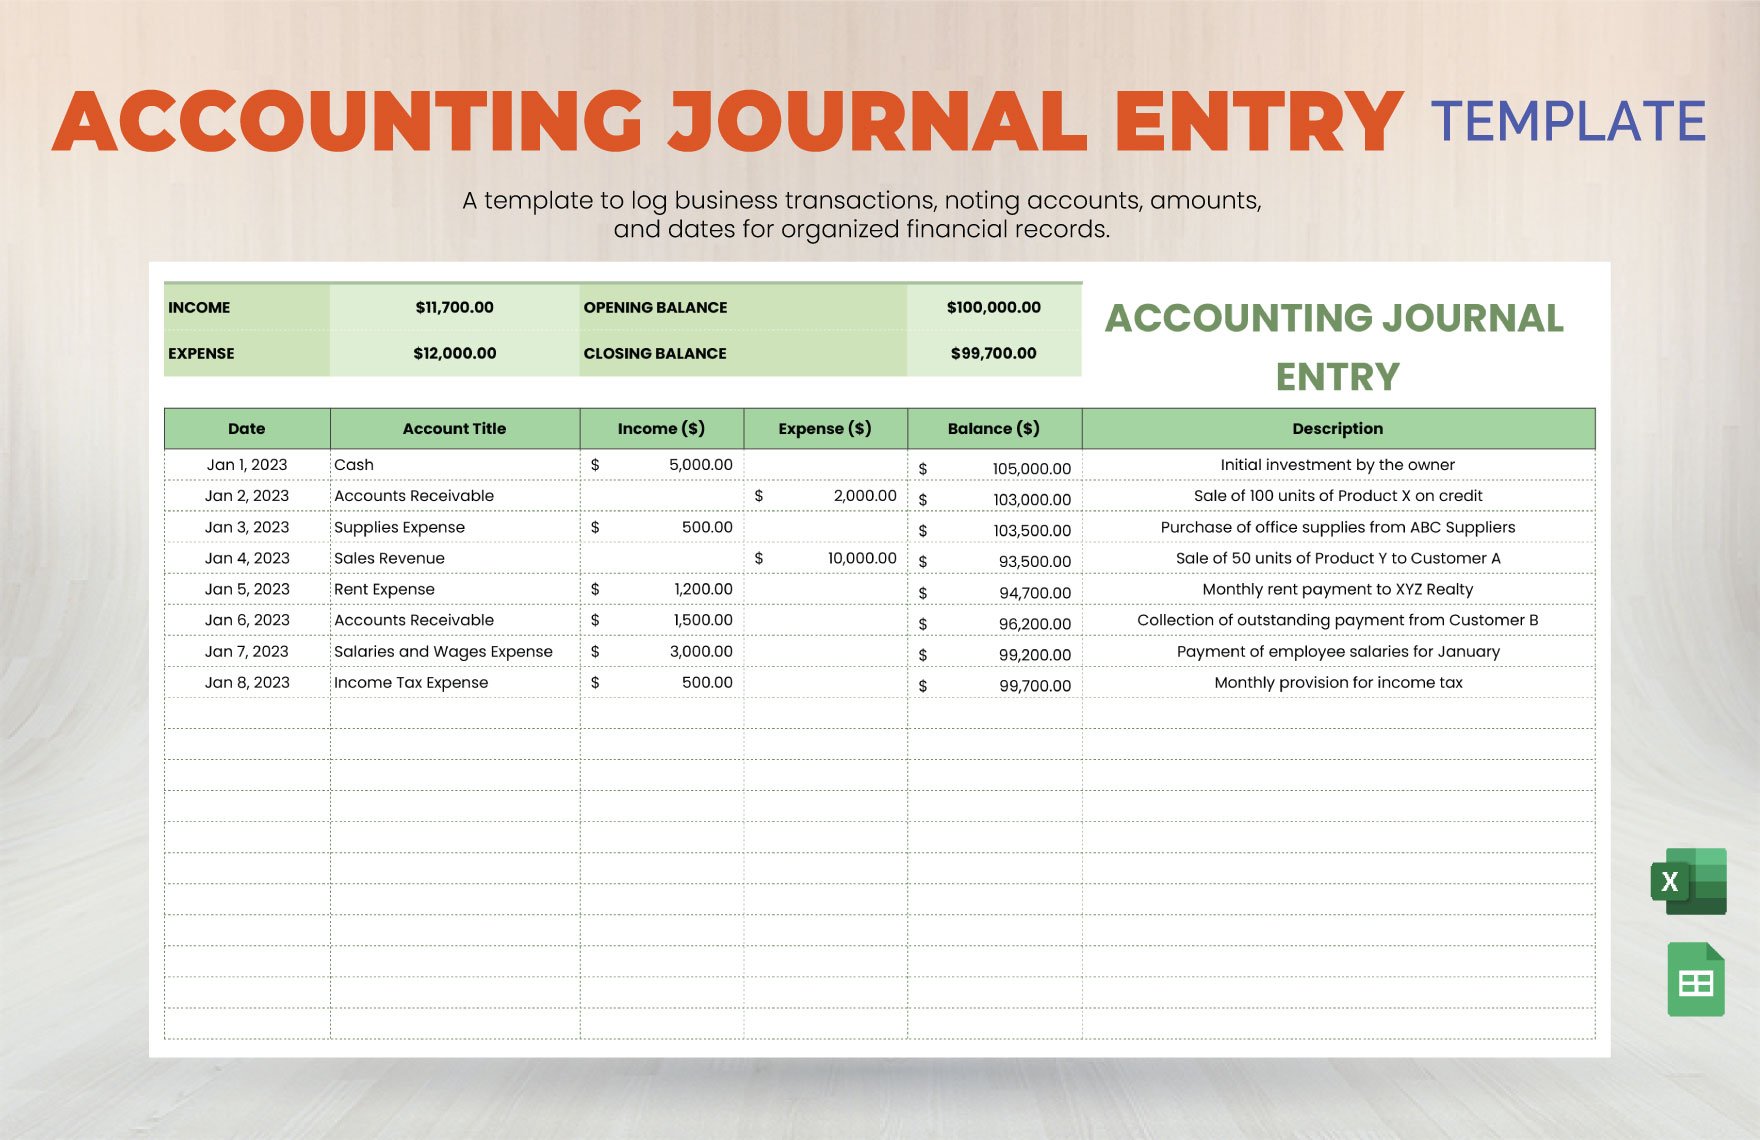 Accounting Journal Entry Template